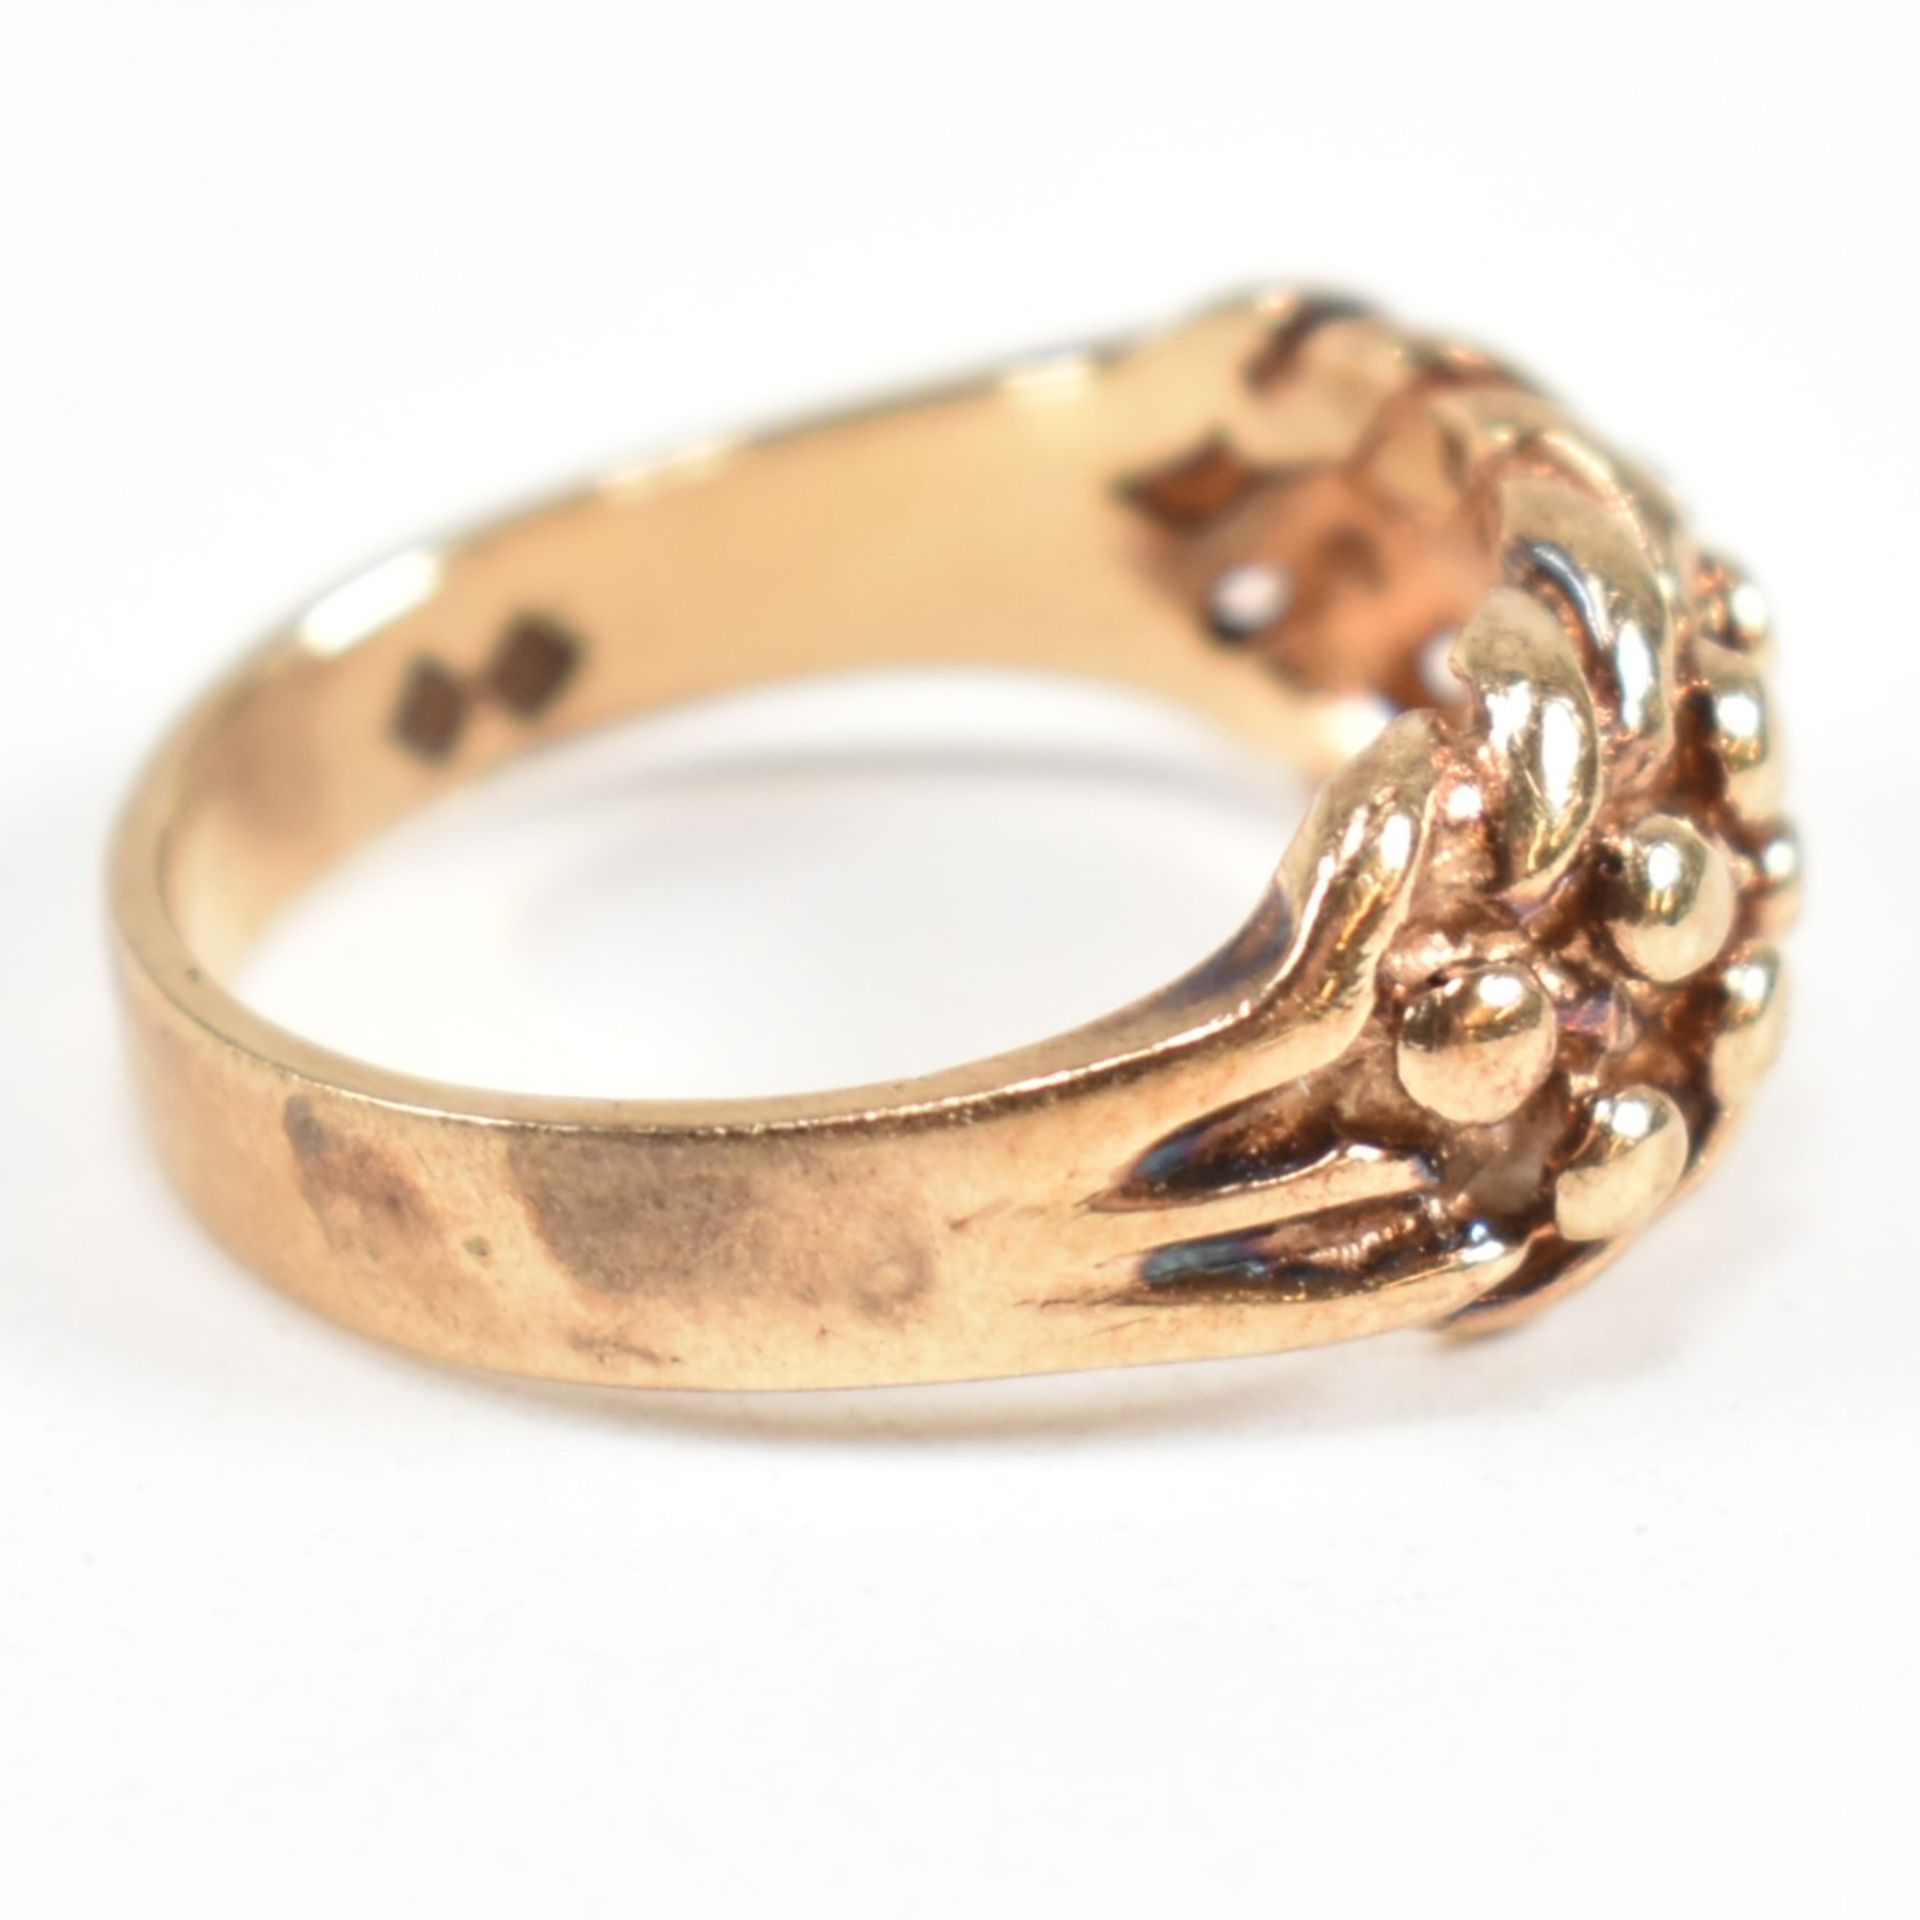 HALLMARKED 9CT GOLD KEEPER RING - Image 8 of 10